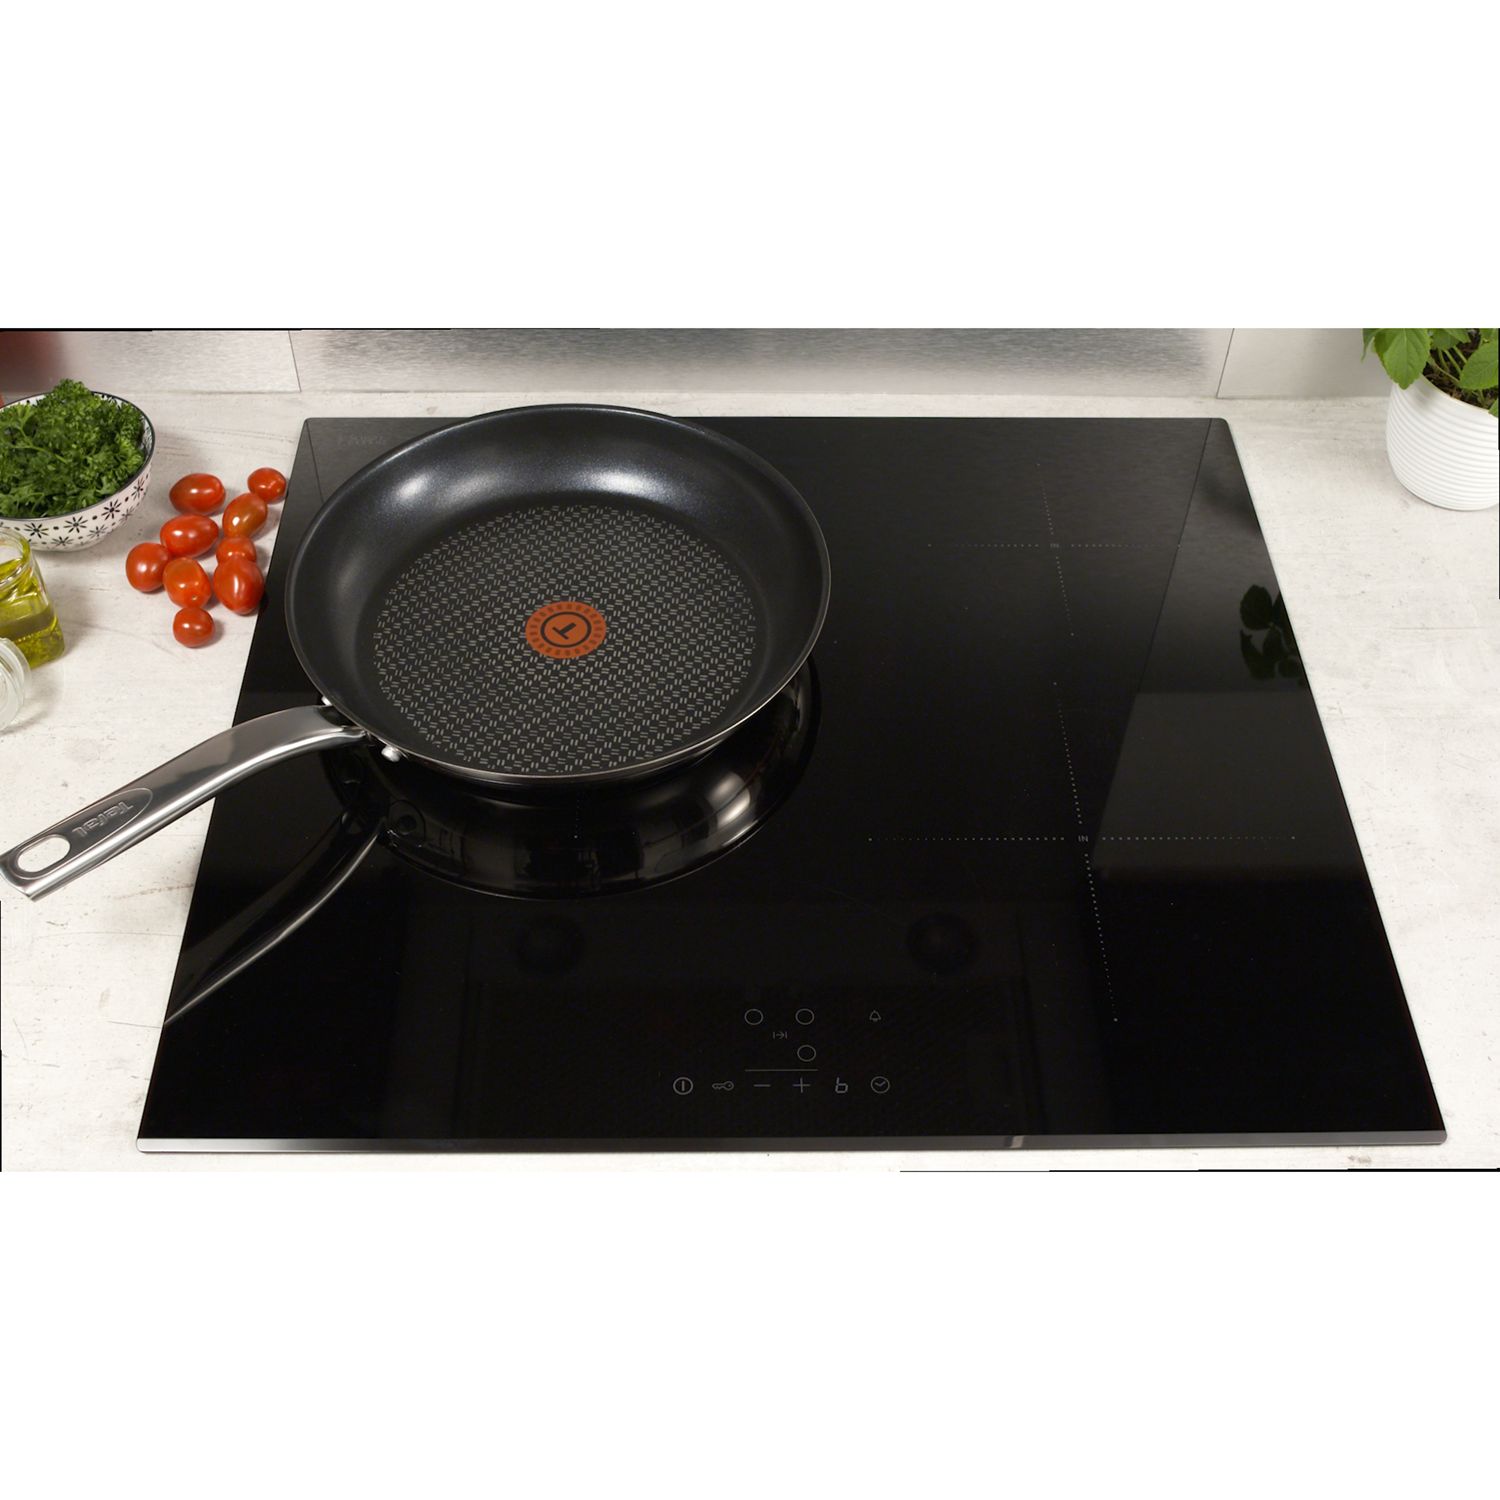 Details about   Tefal Intuition 28cm Induction Non Stick Frying Pan Stainless Steel Fry Pan 